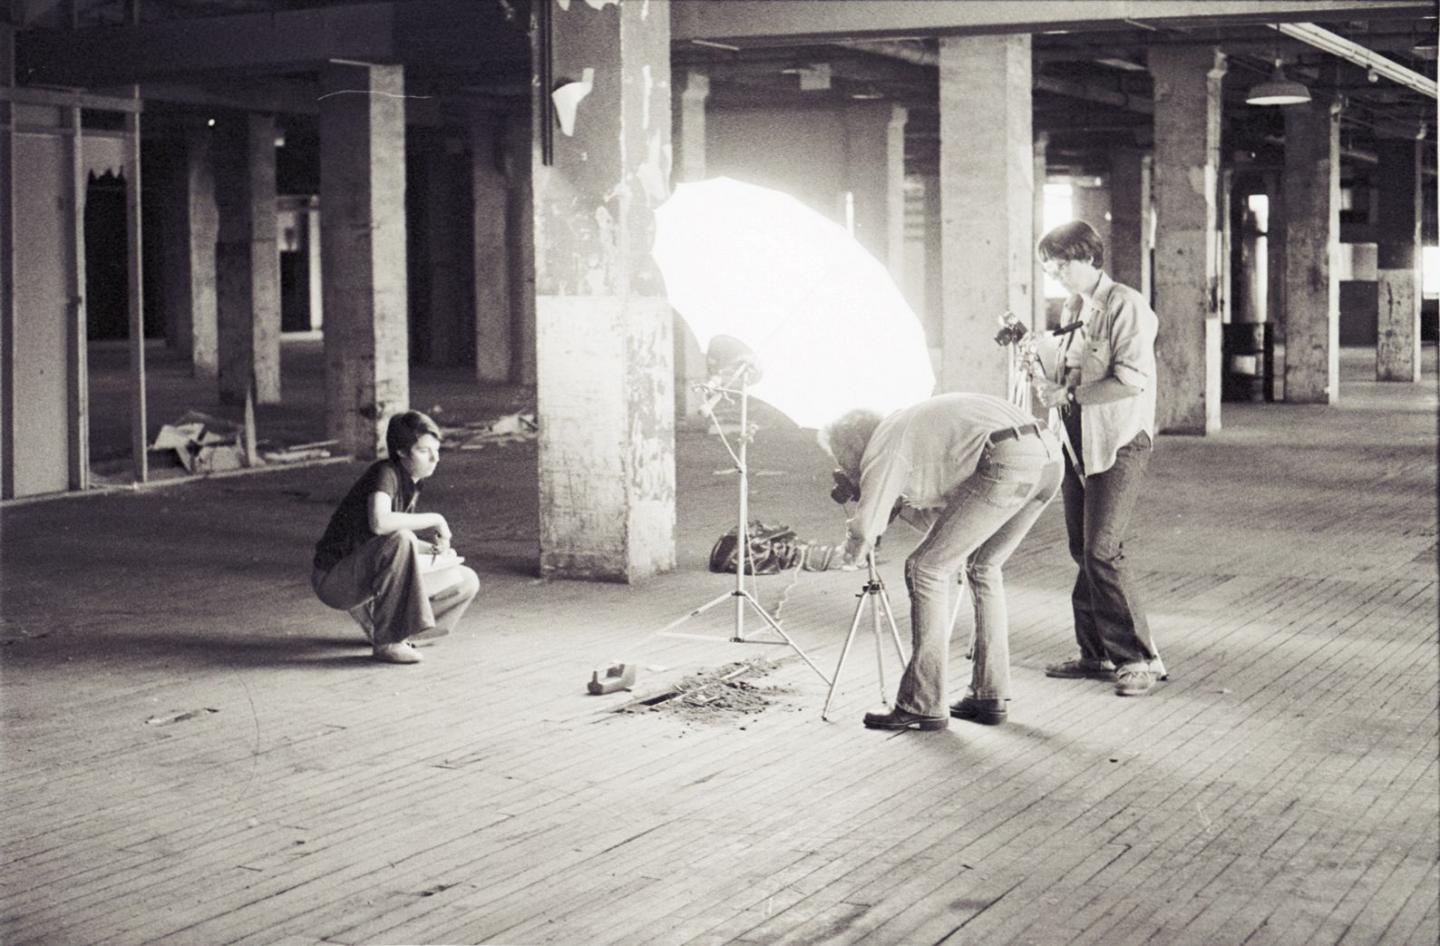 Three people looking at a pile of dirt with a large umbrella light while taking photos.